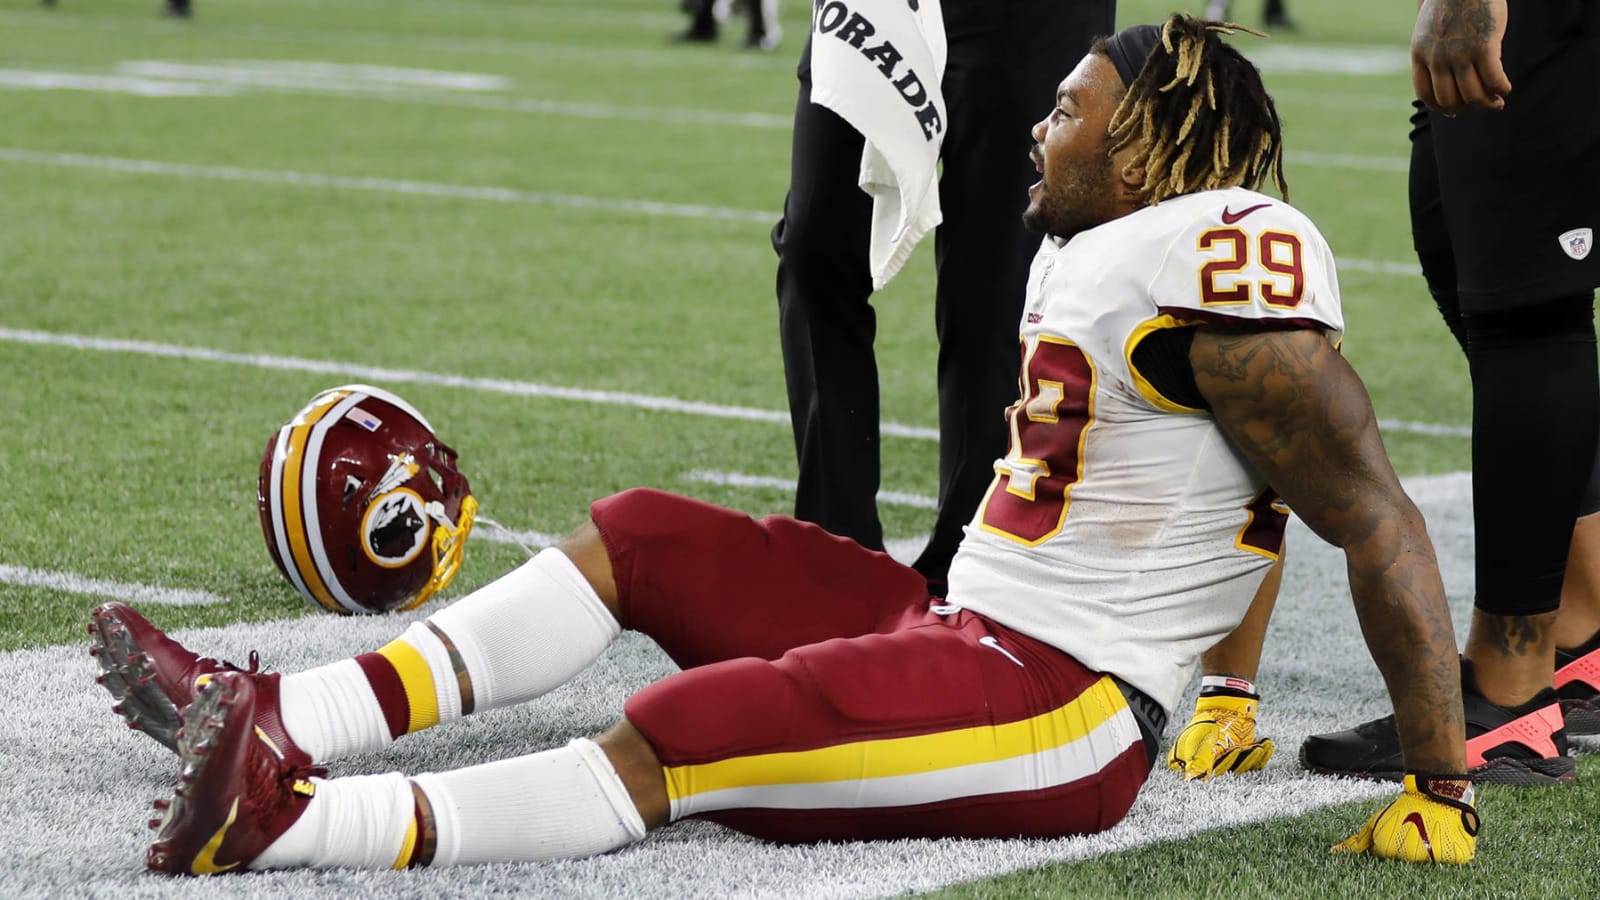 Washington continues to be down on its injury luck after Derrius Guice hype derailed